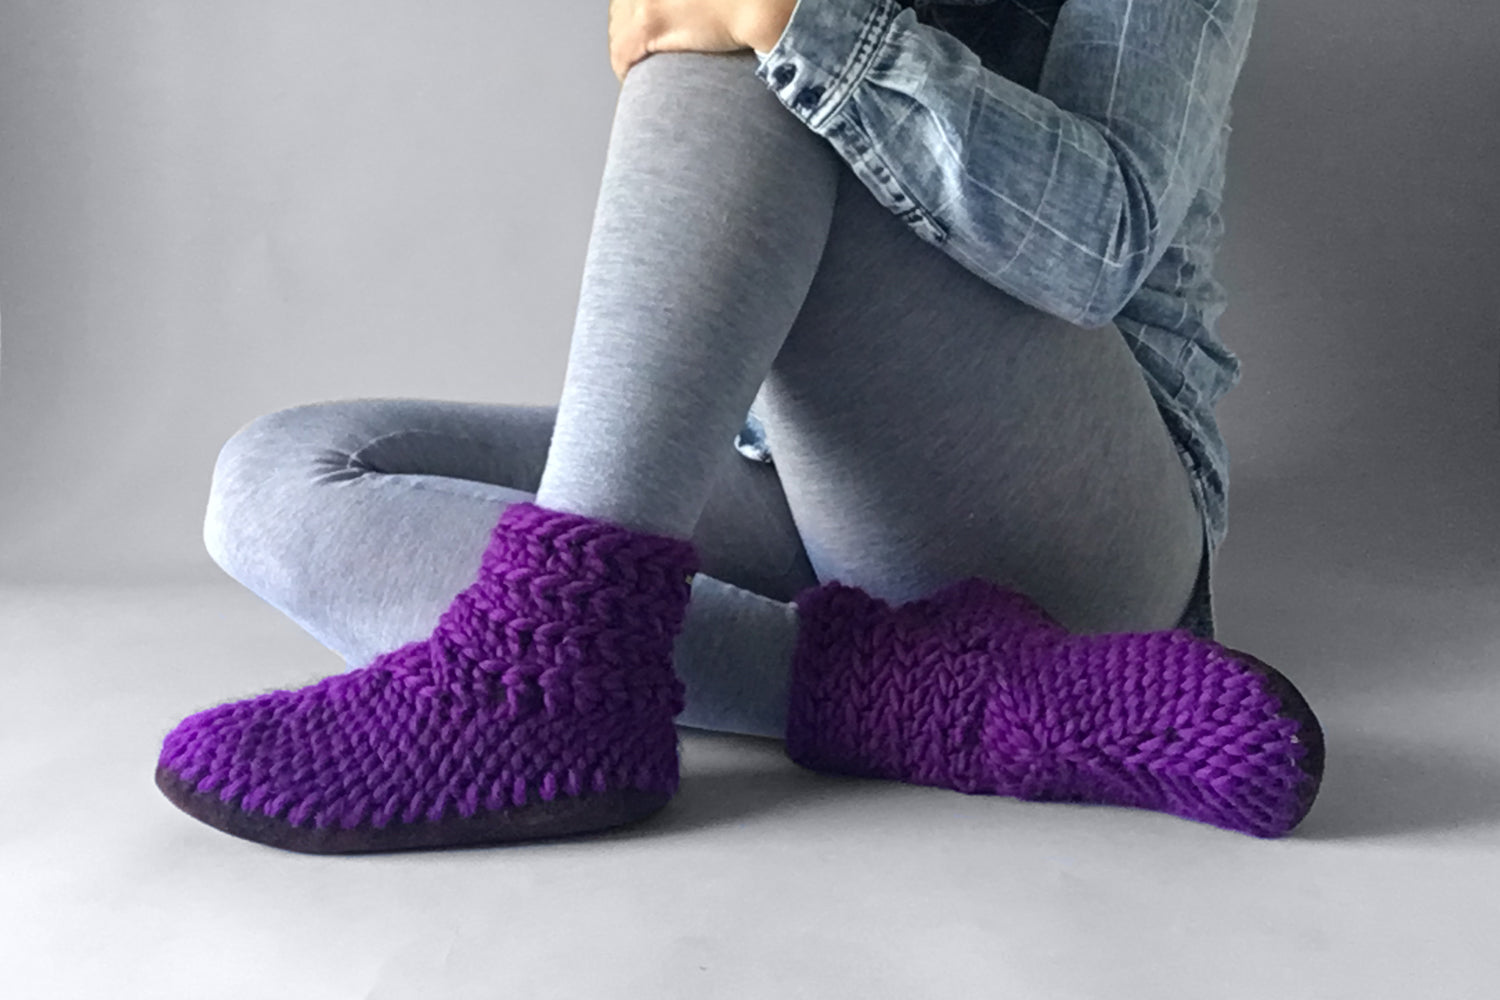 Demi-Boot: Smoothie, Purple Merino Wool Slipper with Leather Sole